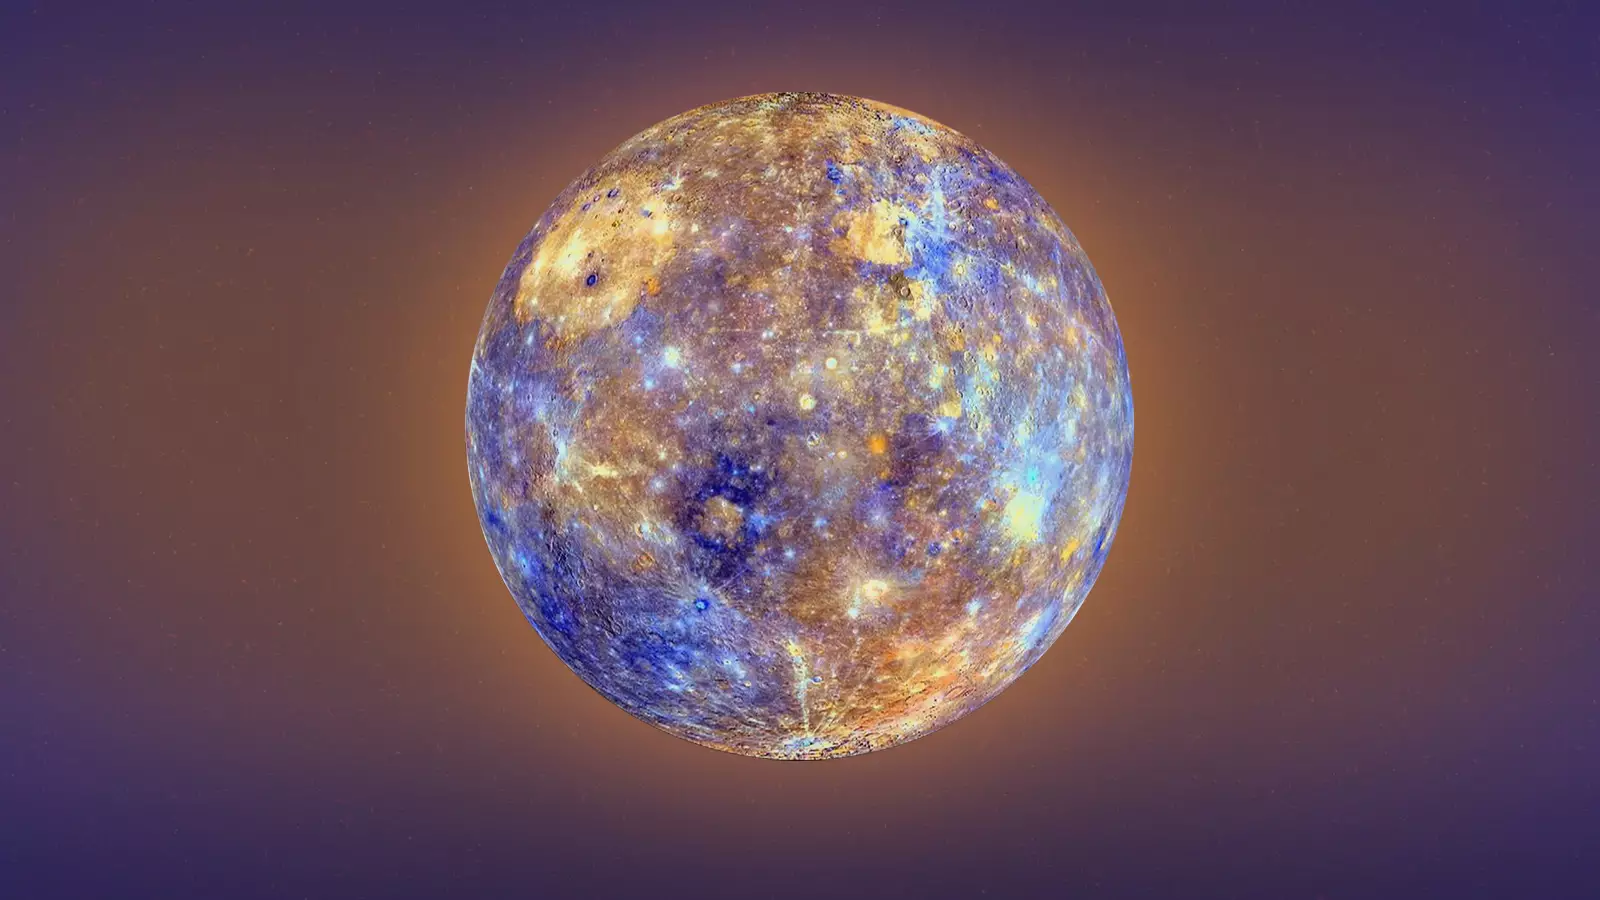 The surface of Mercury.